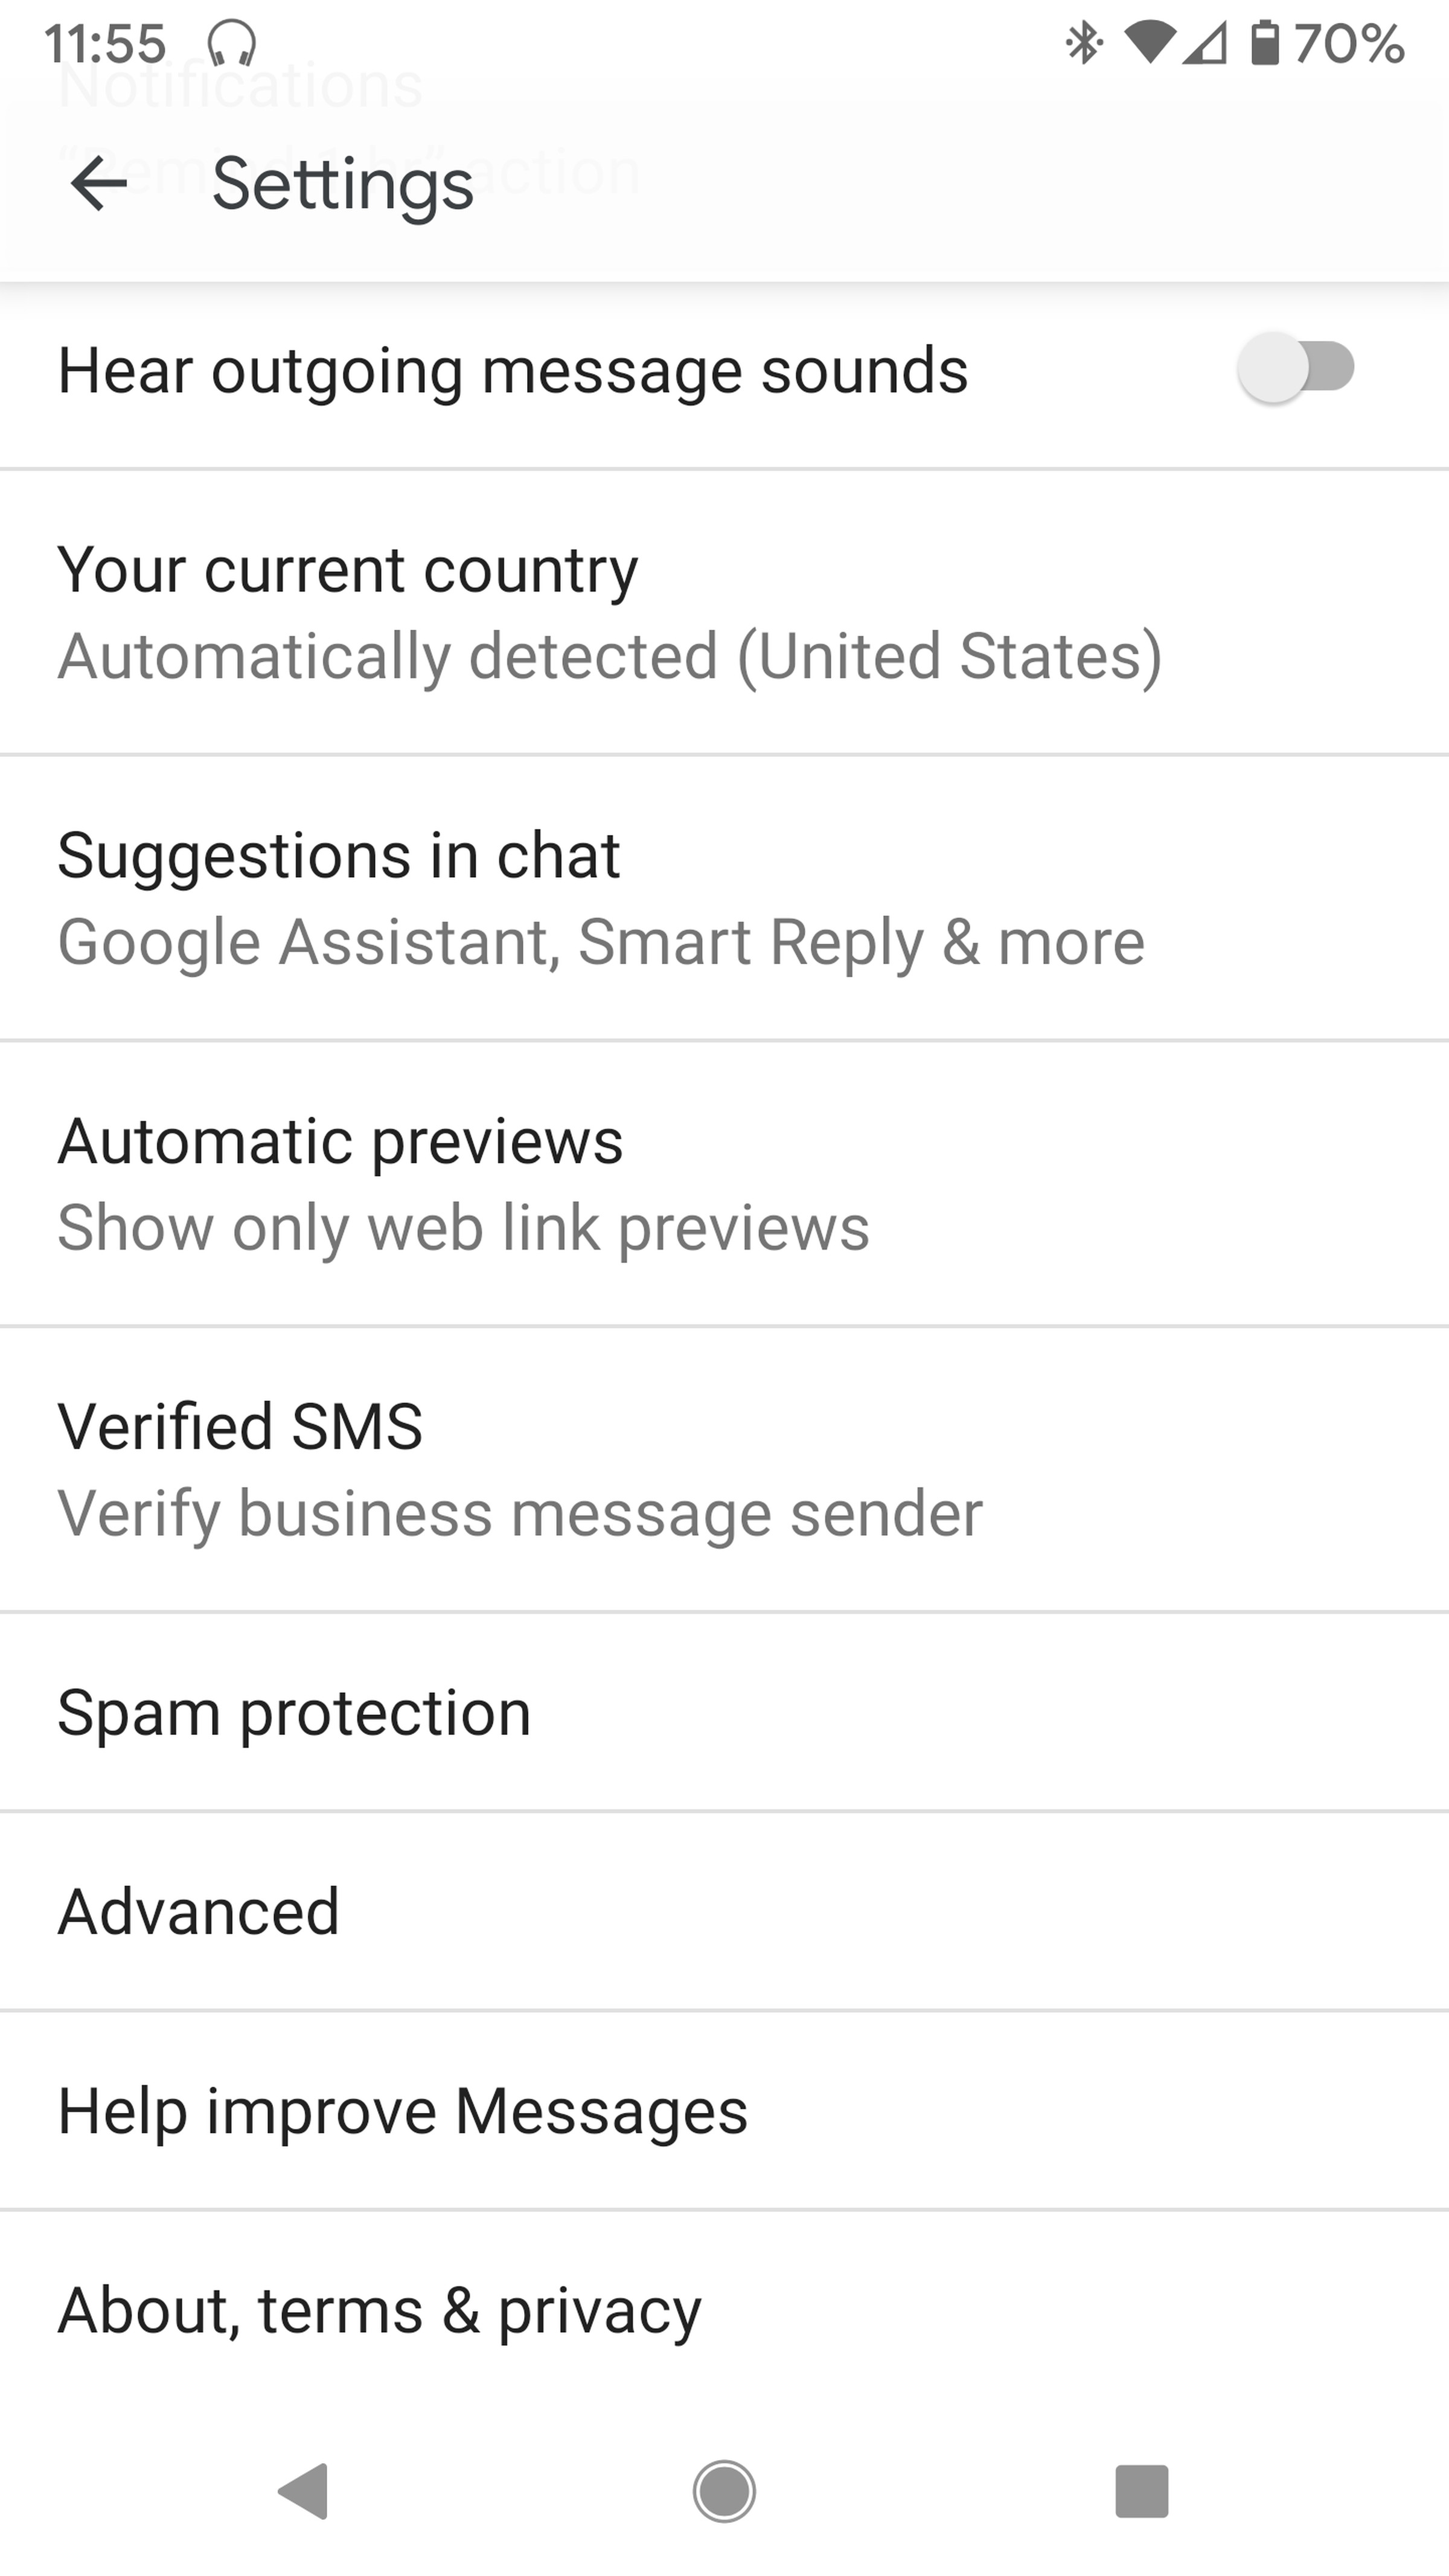 To set up spam blocking, go to “Settings” &gt; “Spam protection.”